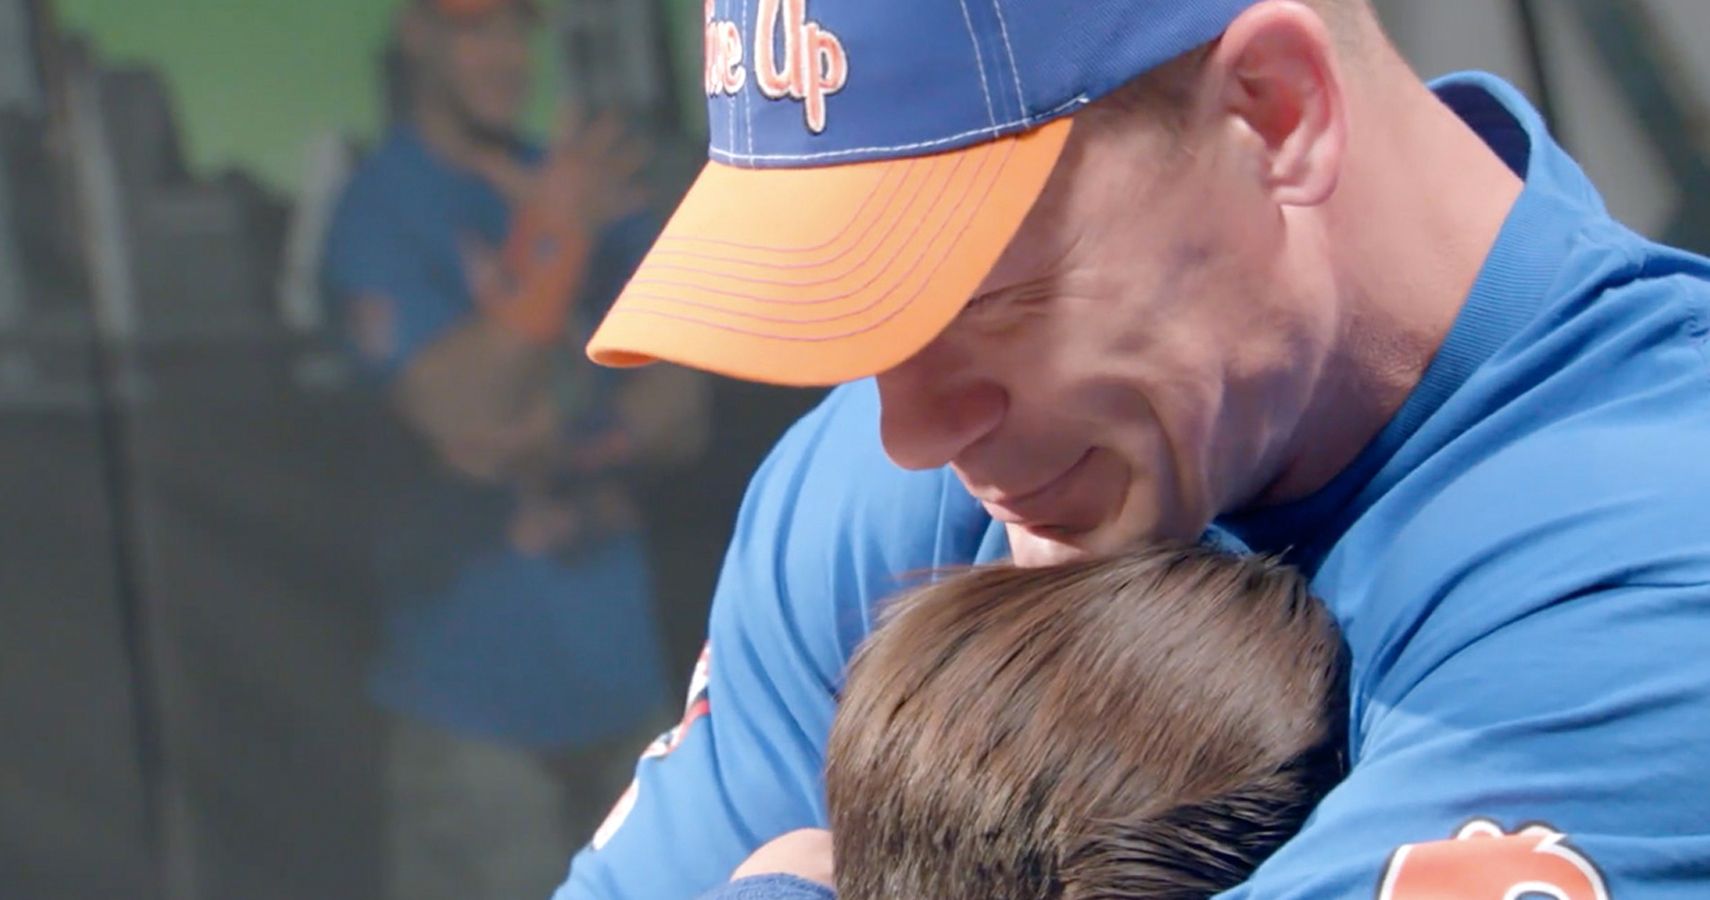 Fans Surprising John Cena To Thank Him Will Make You Tear Up.